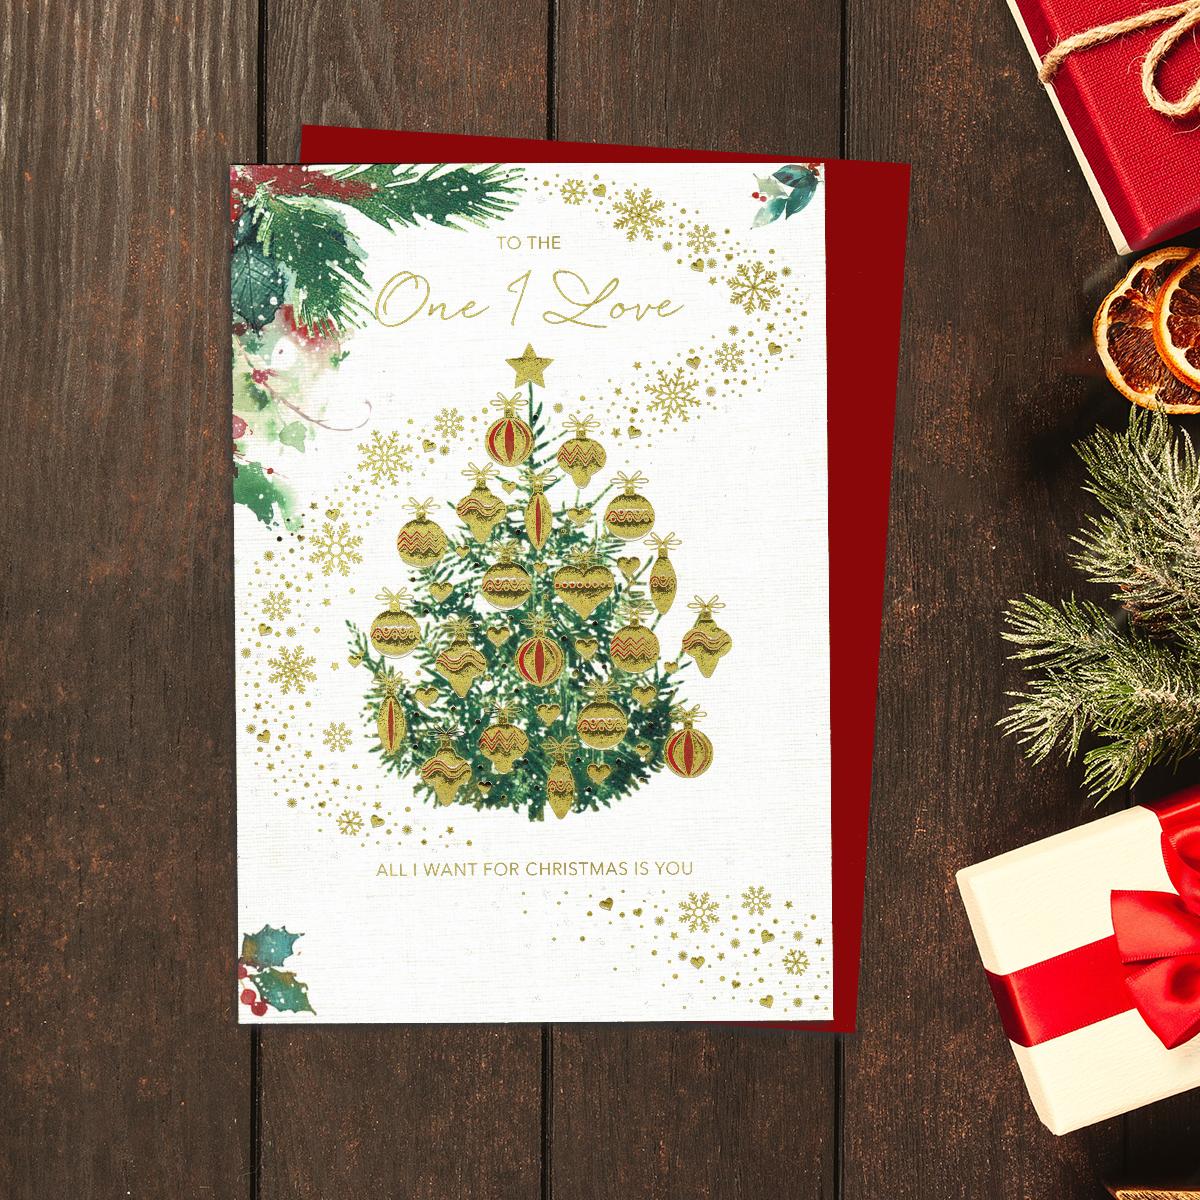 To The One I Love Christmas Card Showing An Elegant Christmas Tree Decorated With Gold Foil Baubles. Finished With A Red Envelope